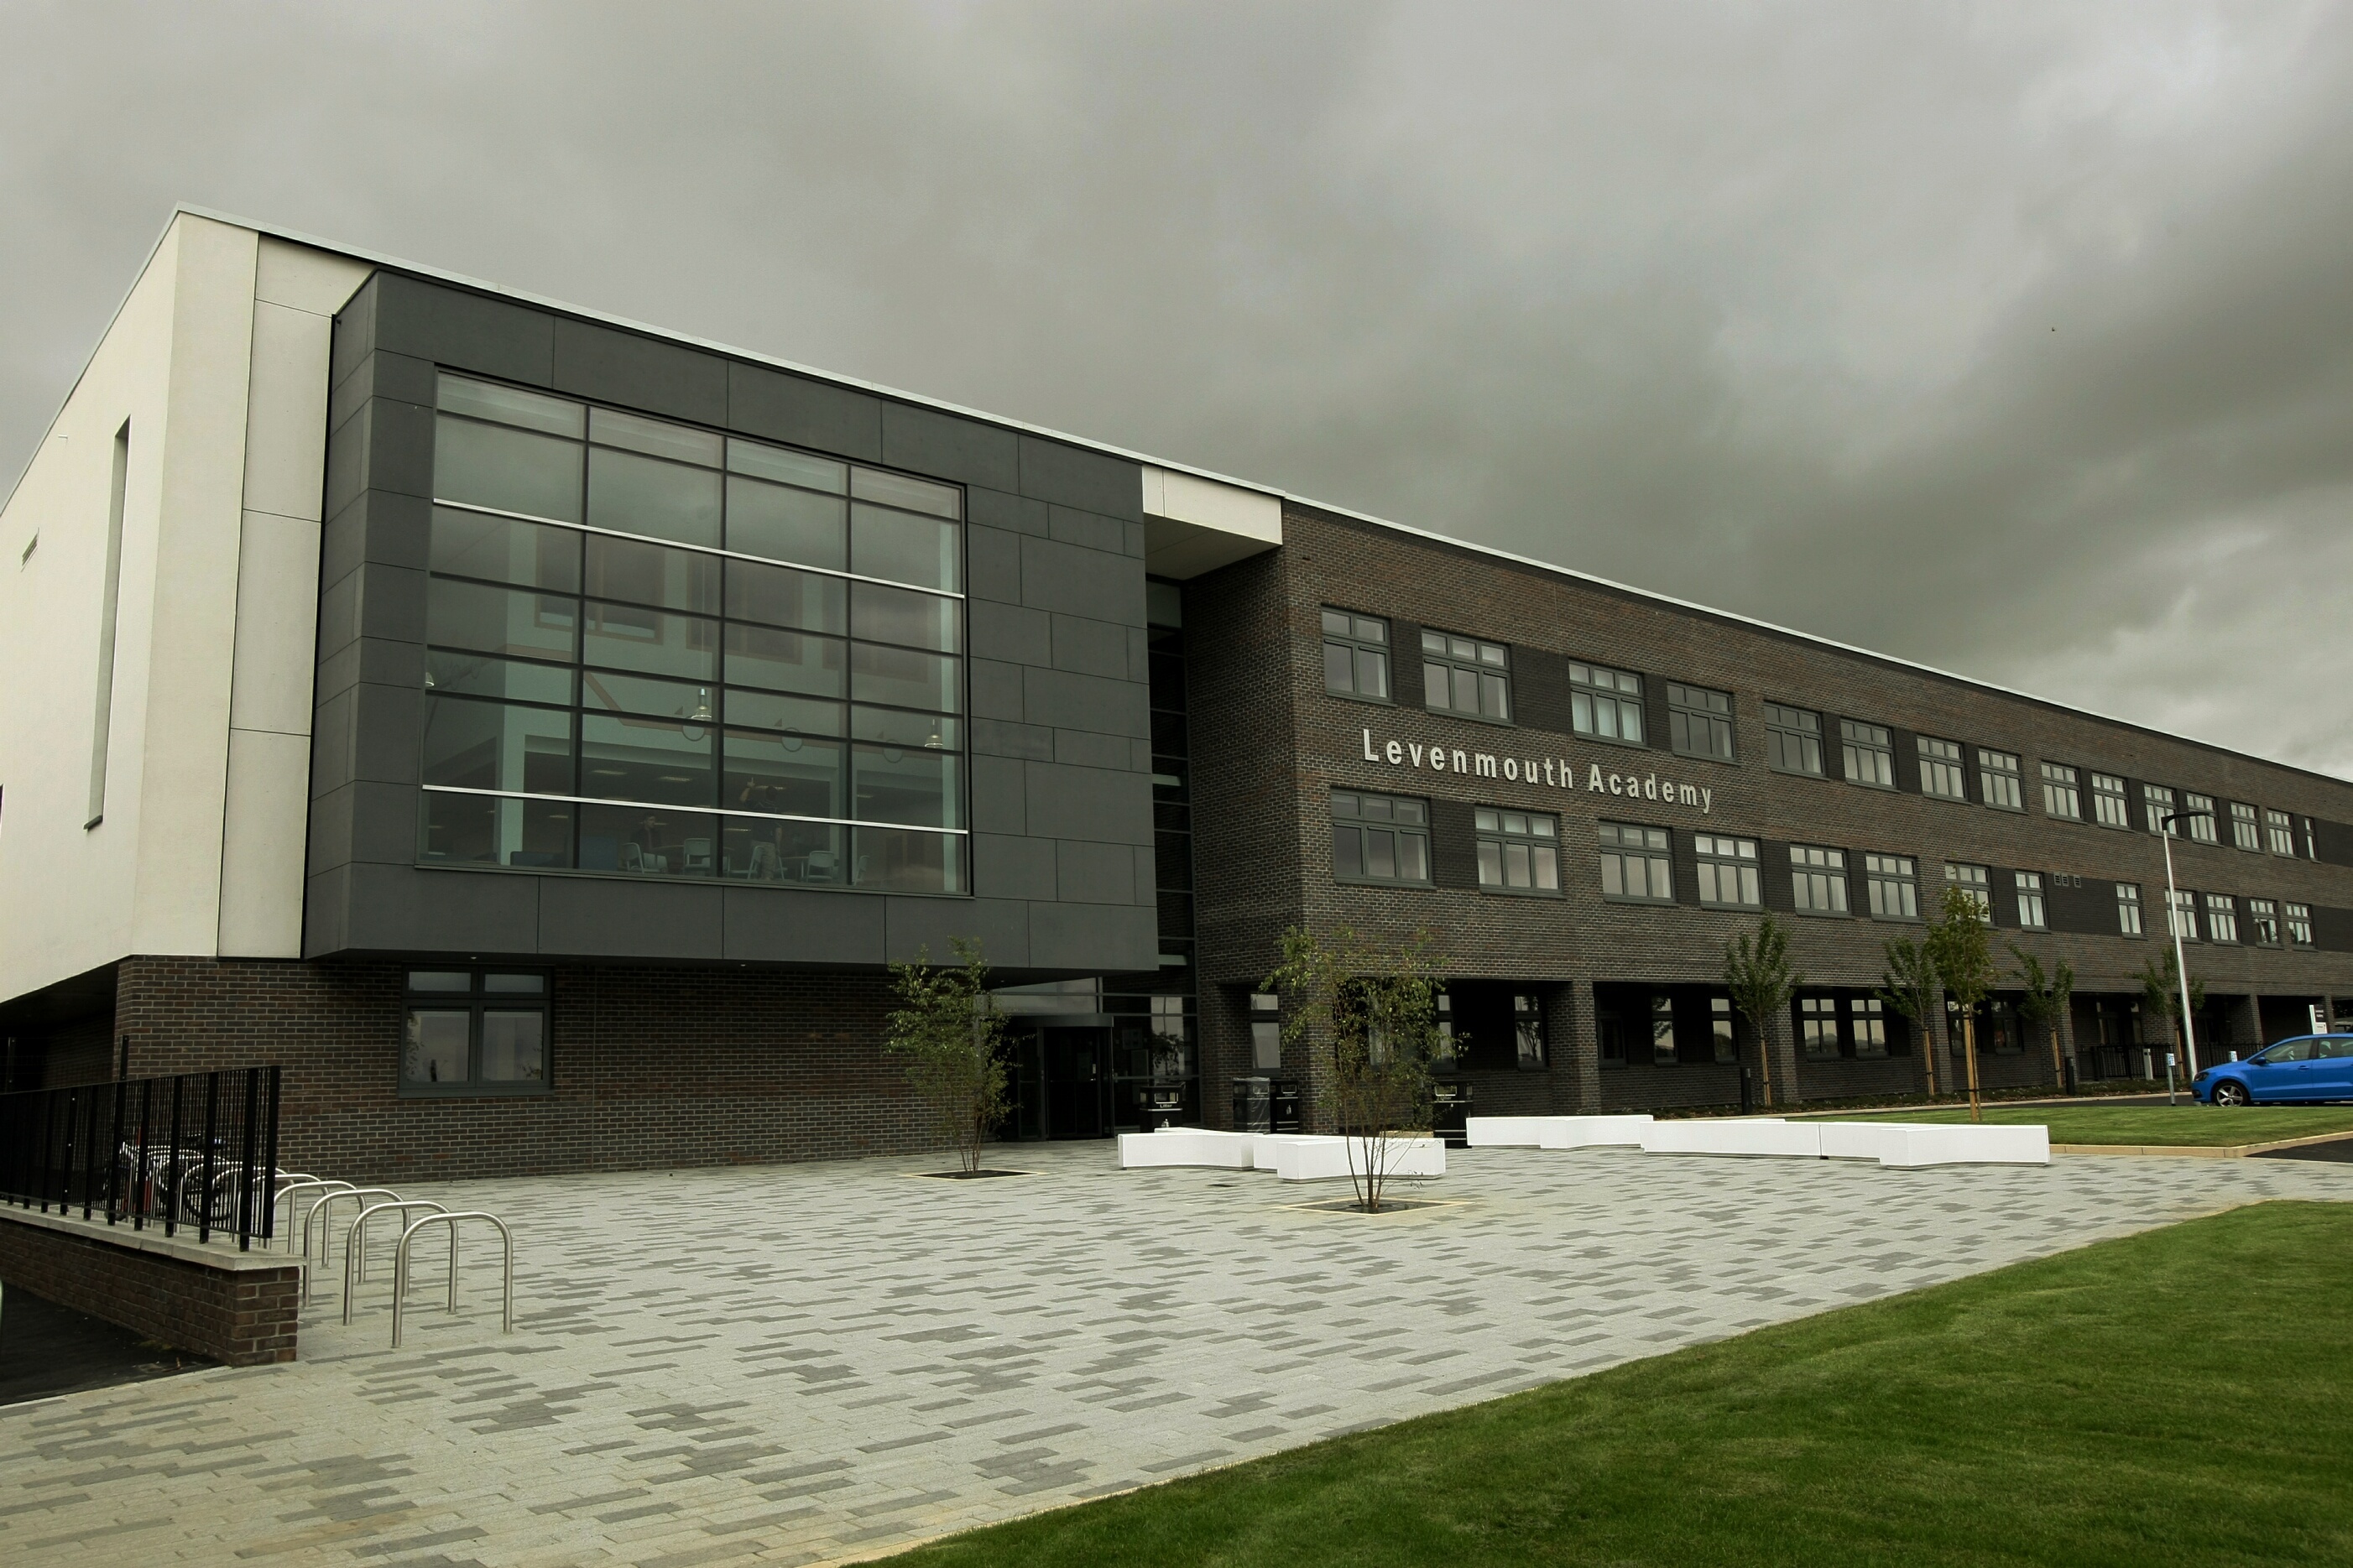 The new Levenmouth Academy.